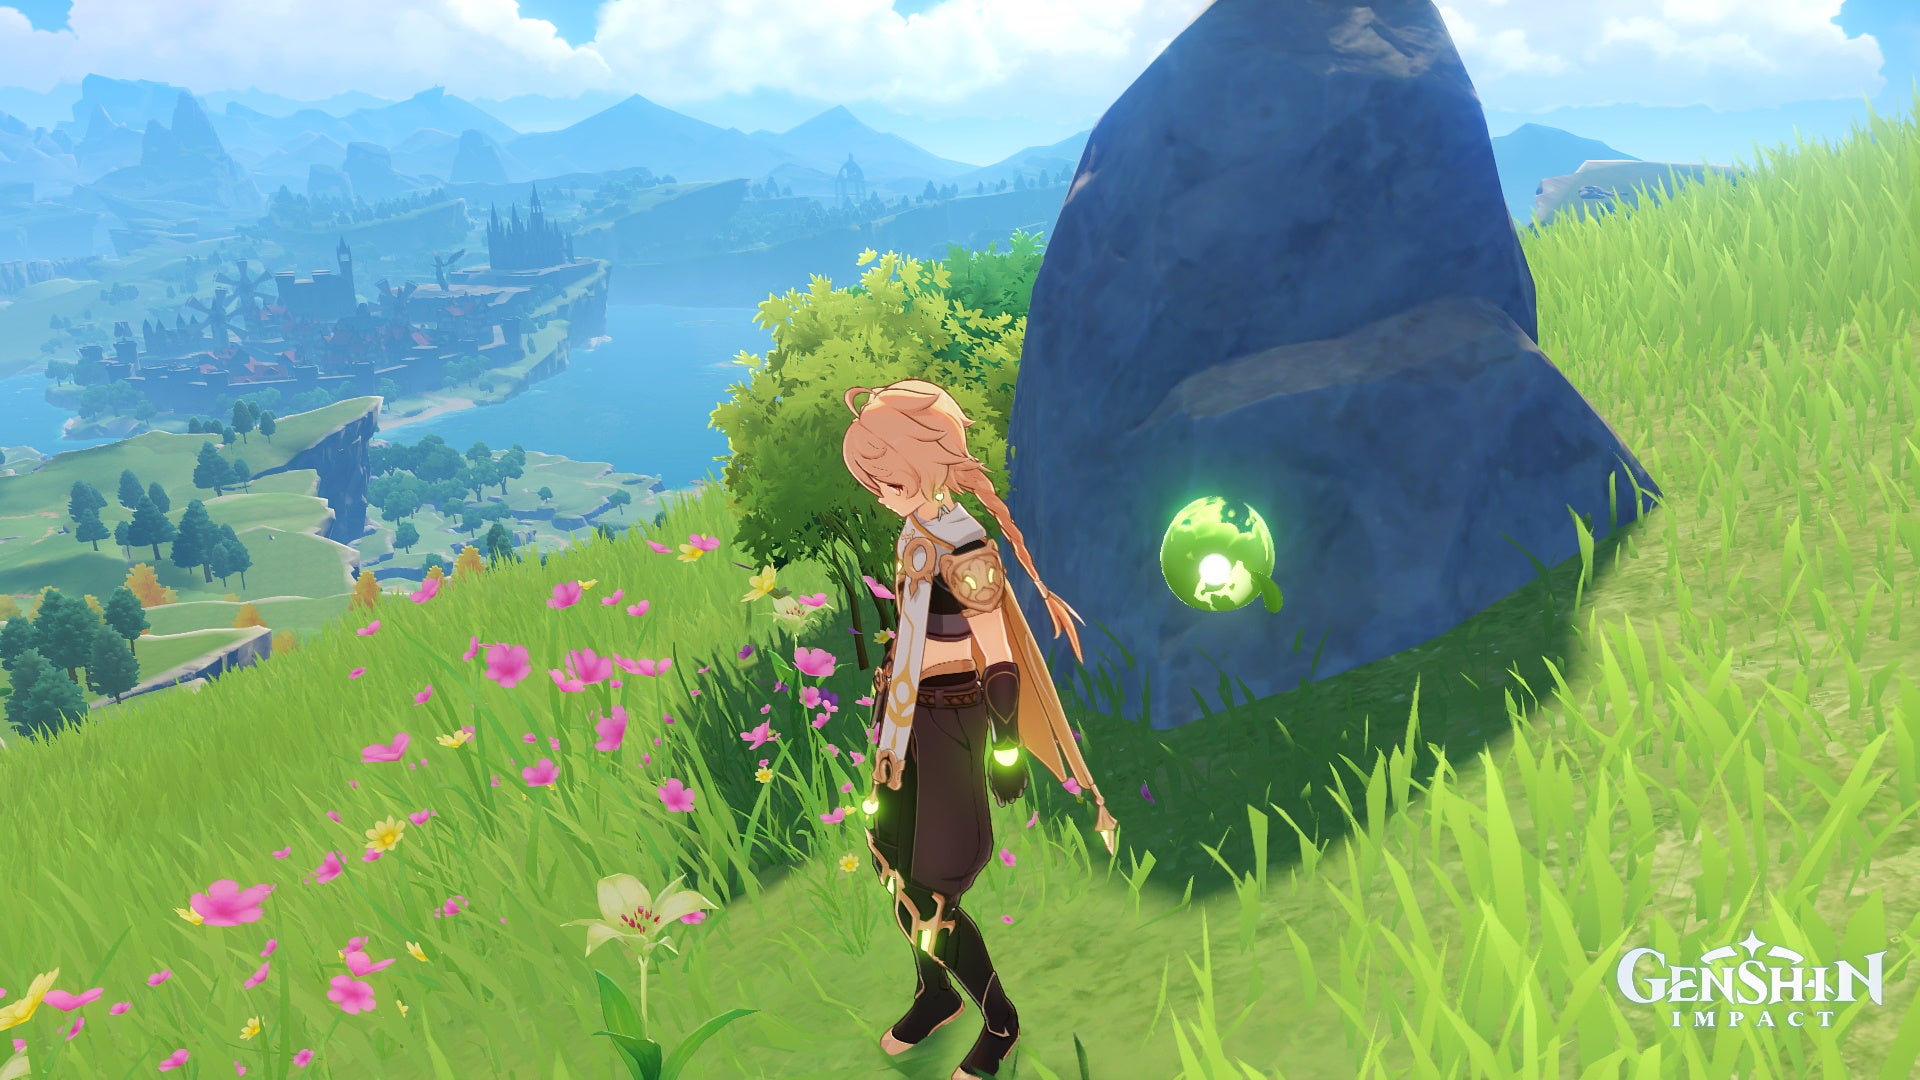 Genshin Impact Cecilia locations and farming: An anime boy with blonde hair looks at a Cecilia flower